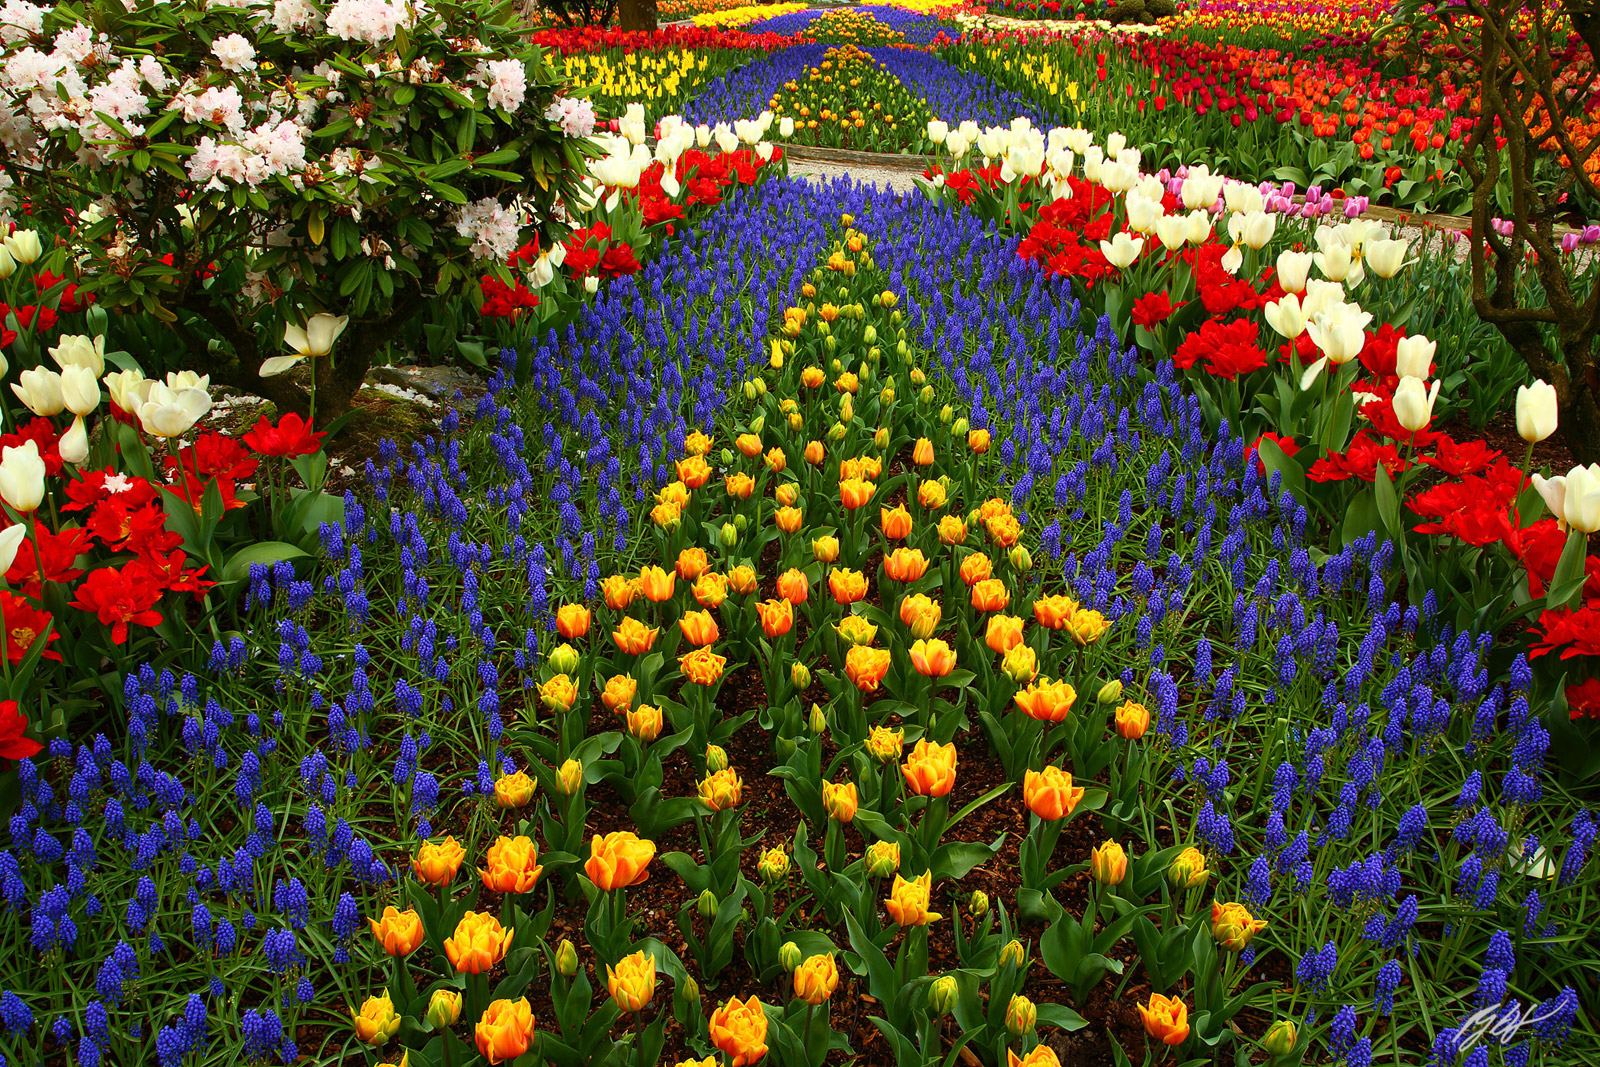 Tulips and Hyacinth Rows in Roozengaarde Garden in Skagit Valley in Washington